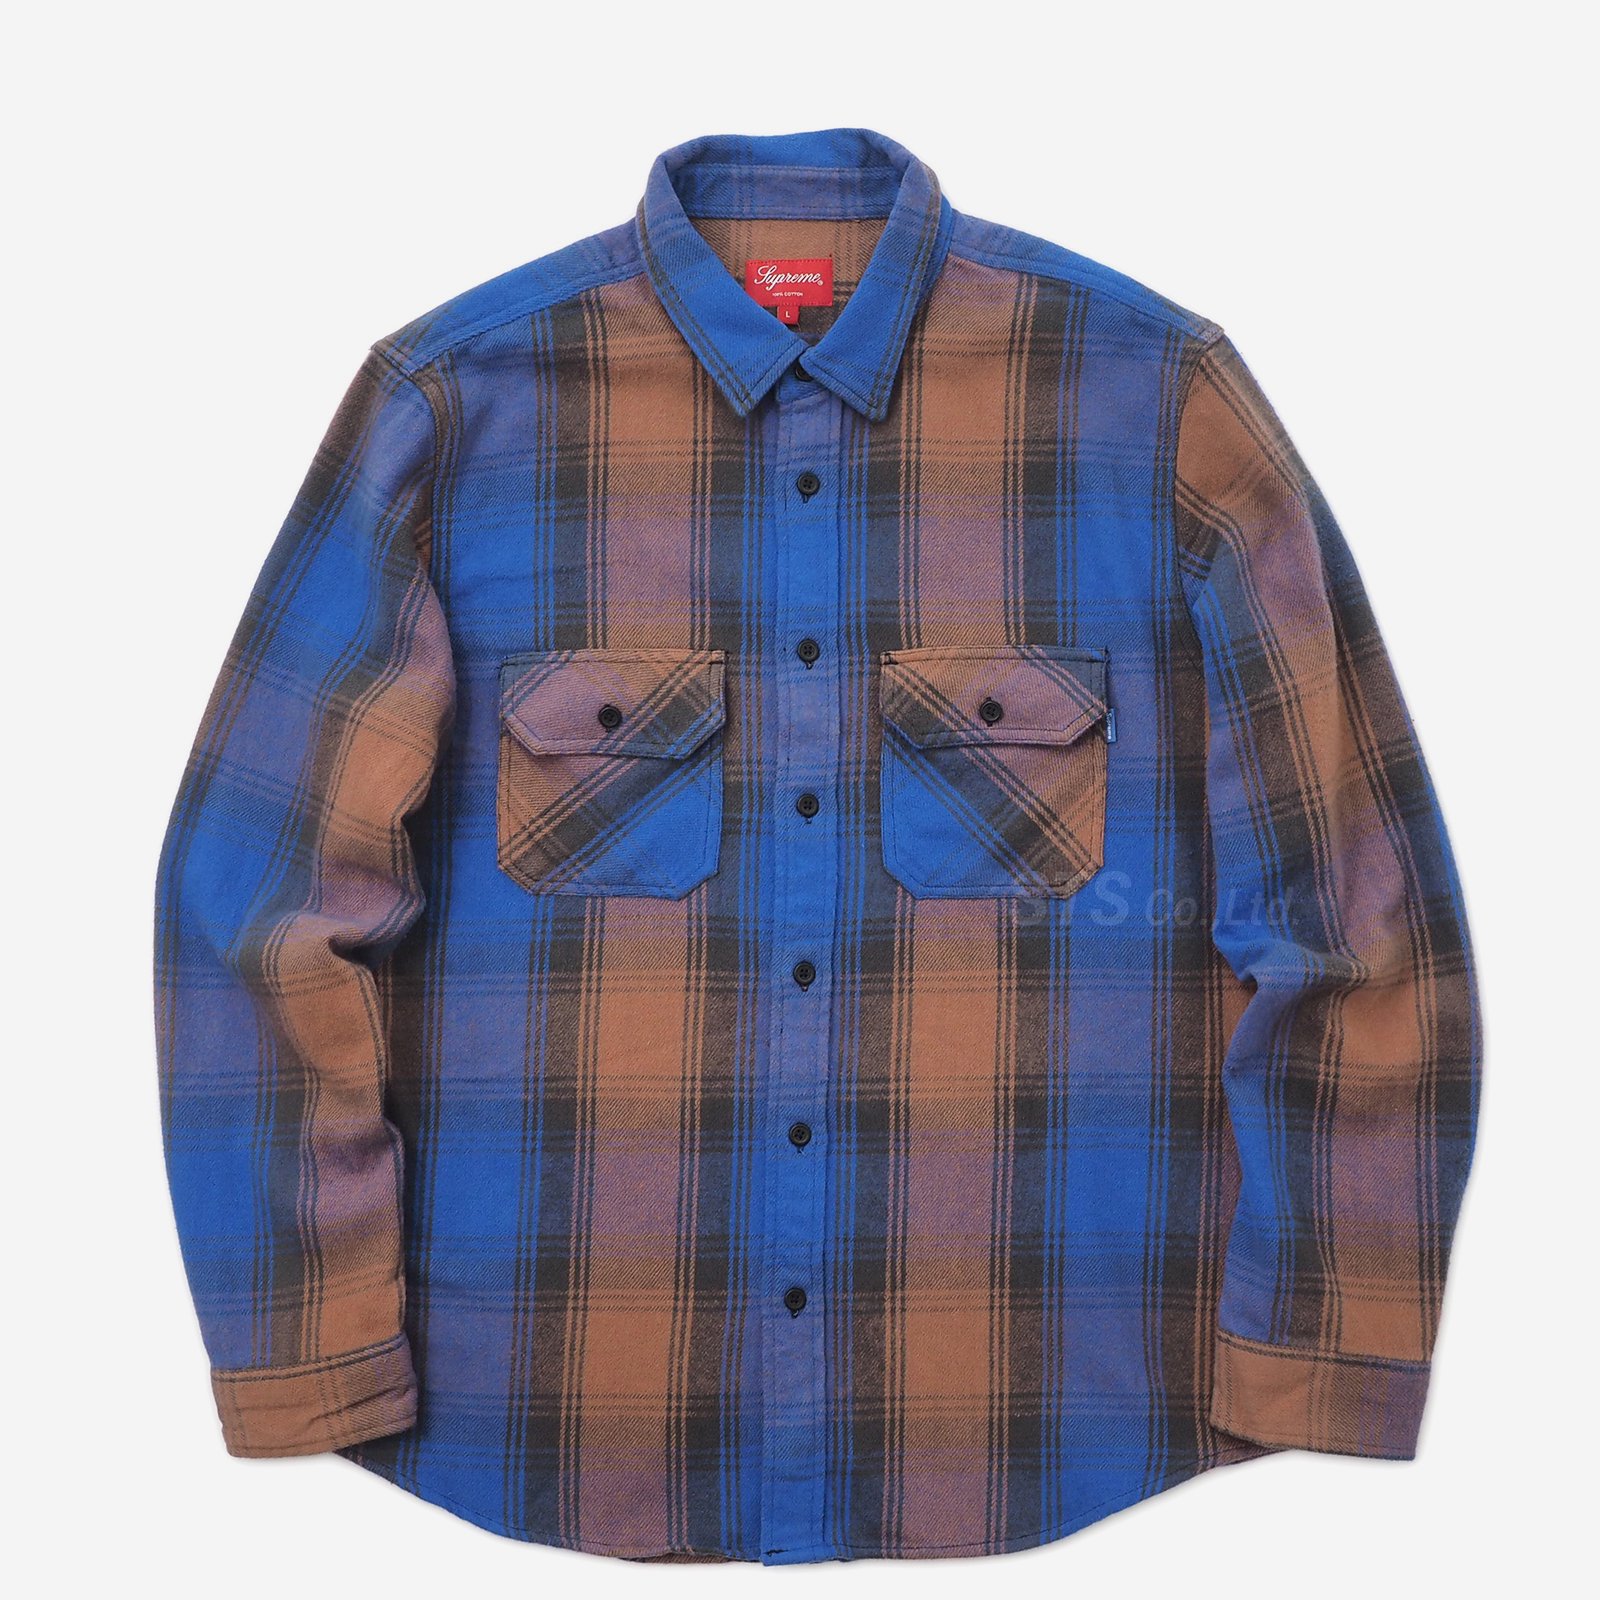 SUPREME 19AW Heavyweight Flannel Shirtトップス